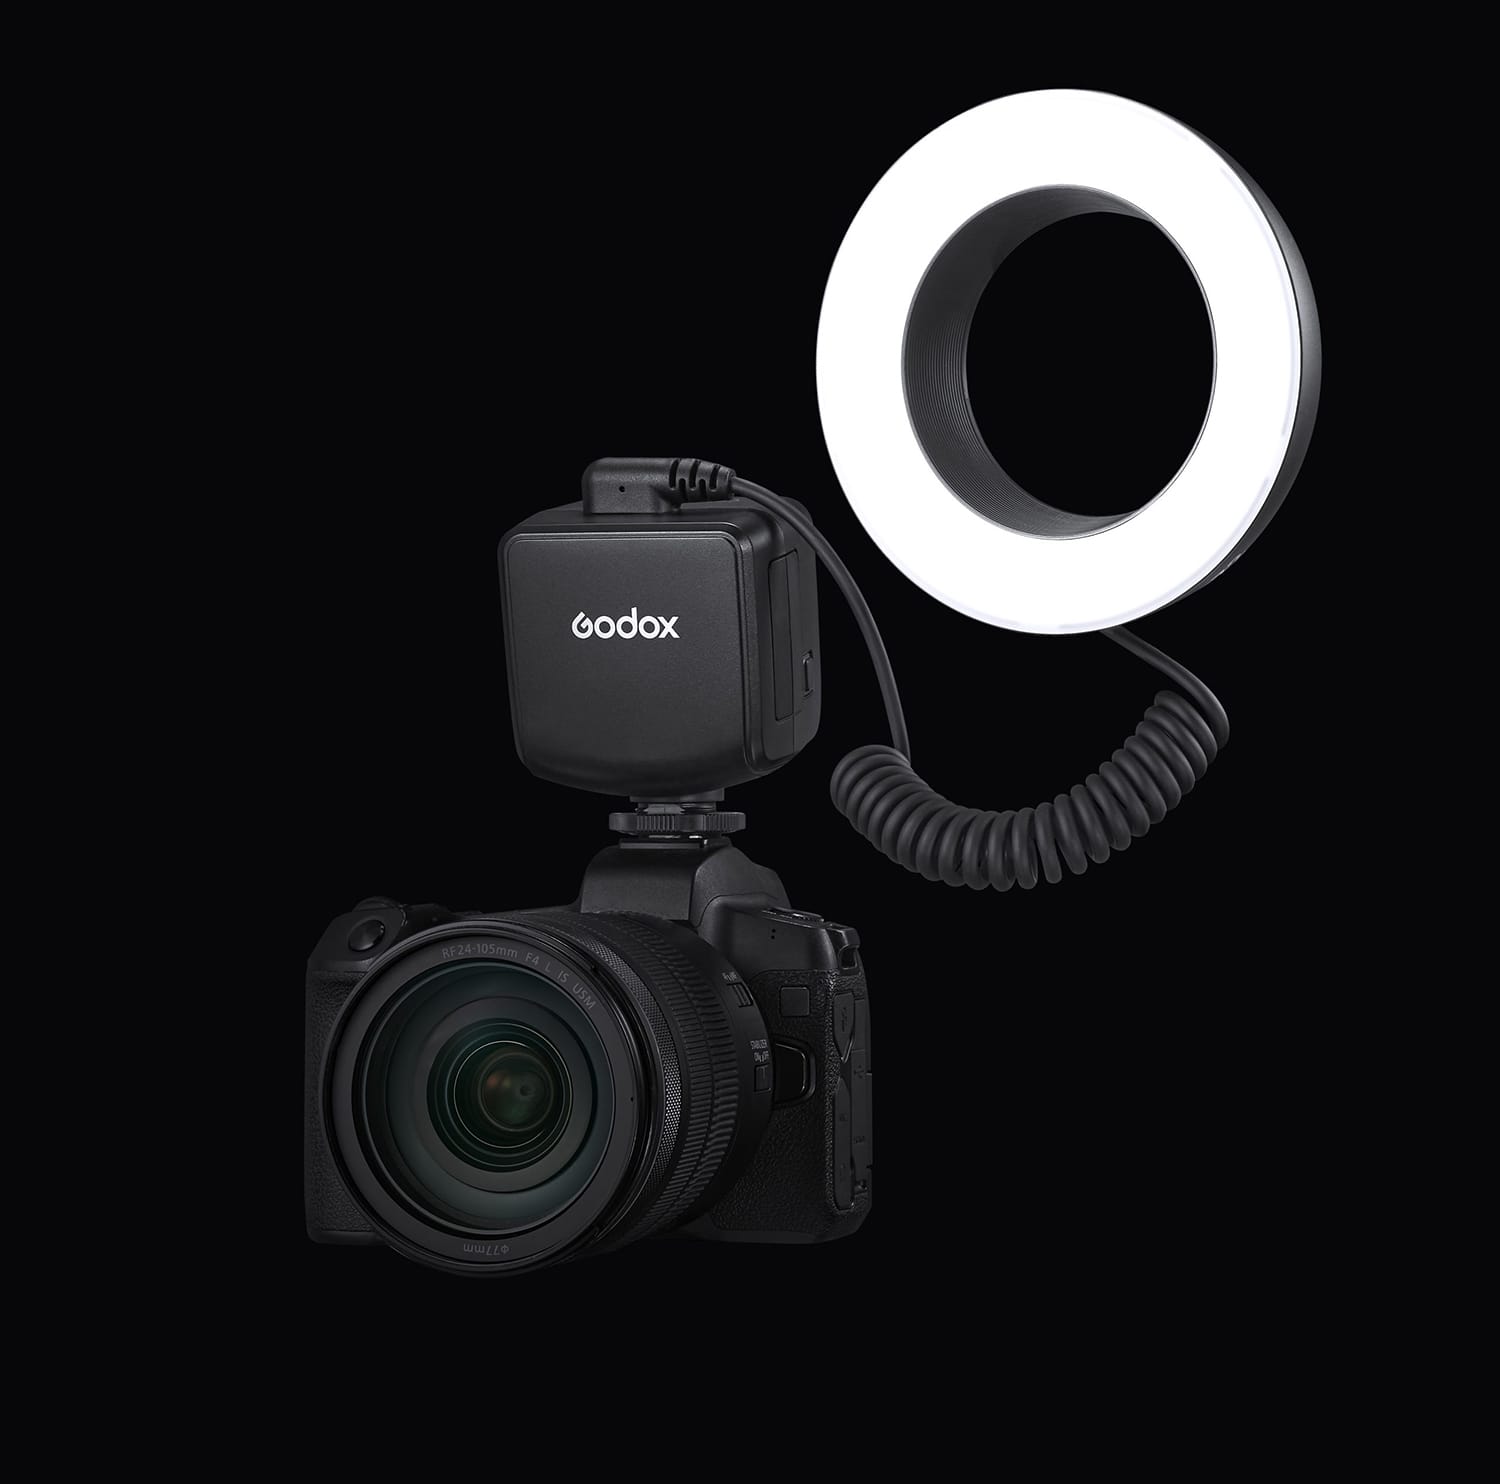 Overview of the Godox RING72 Macro LED Ring Light